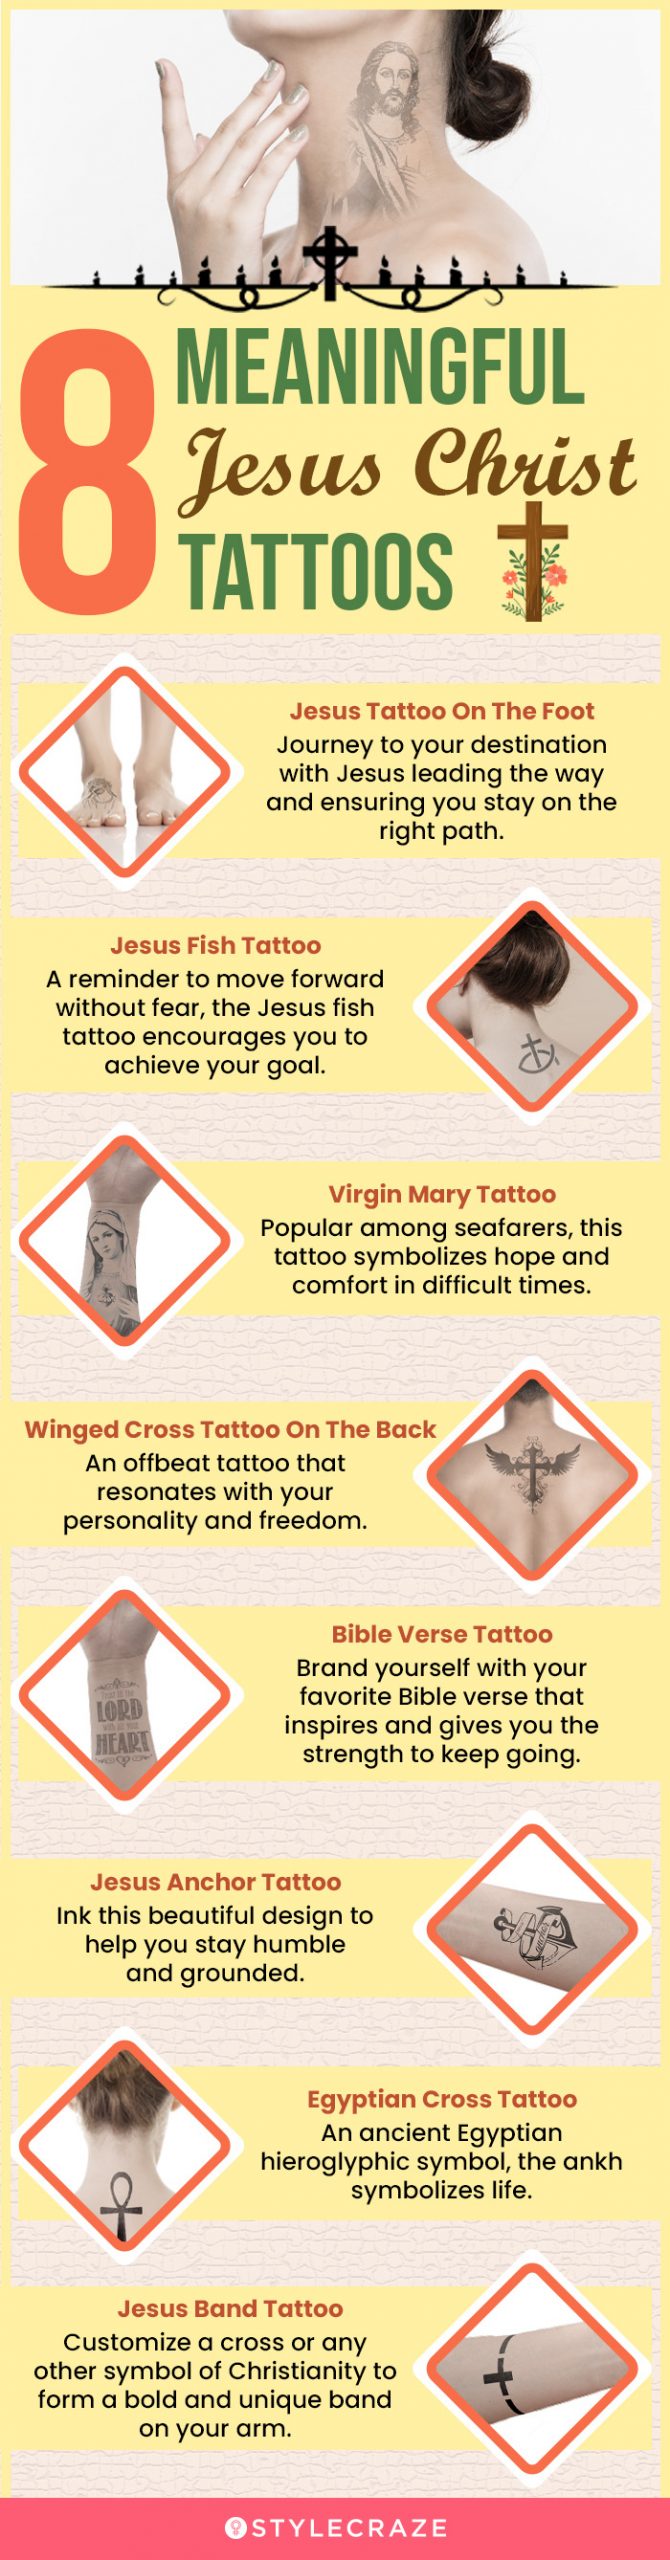 8 meaningful jesus christ tattoos (infographic)